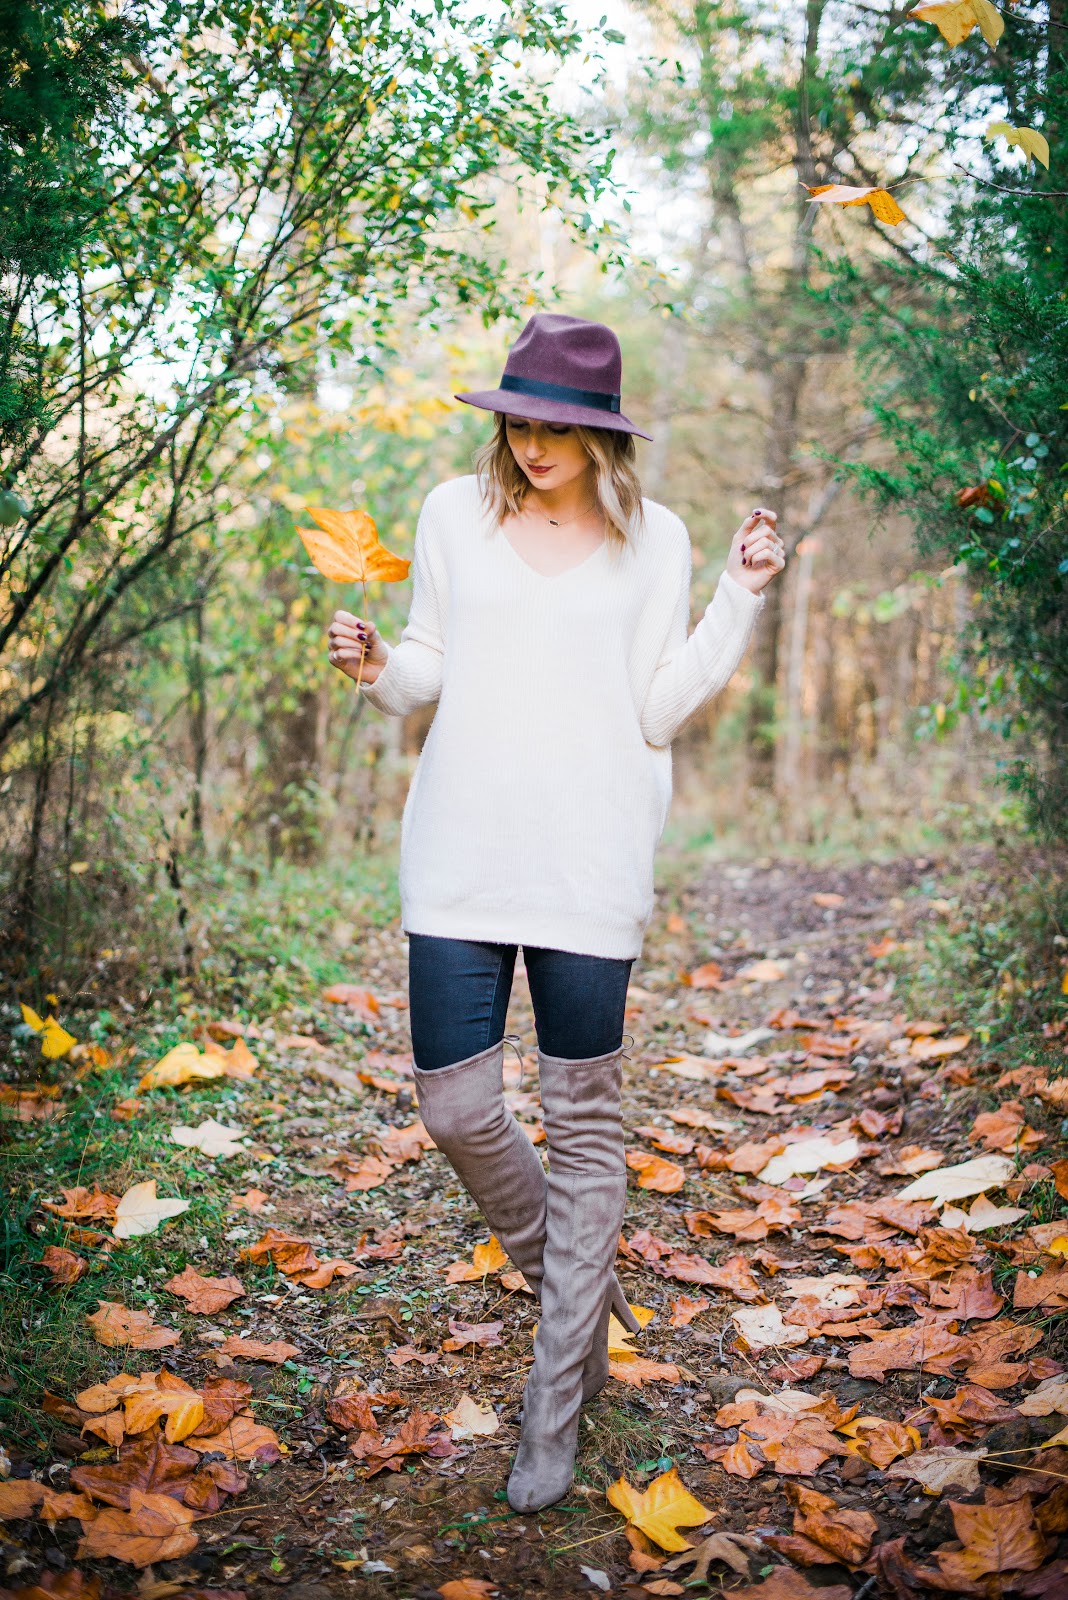 Cozy sweater and boots